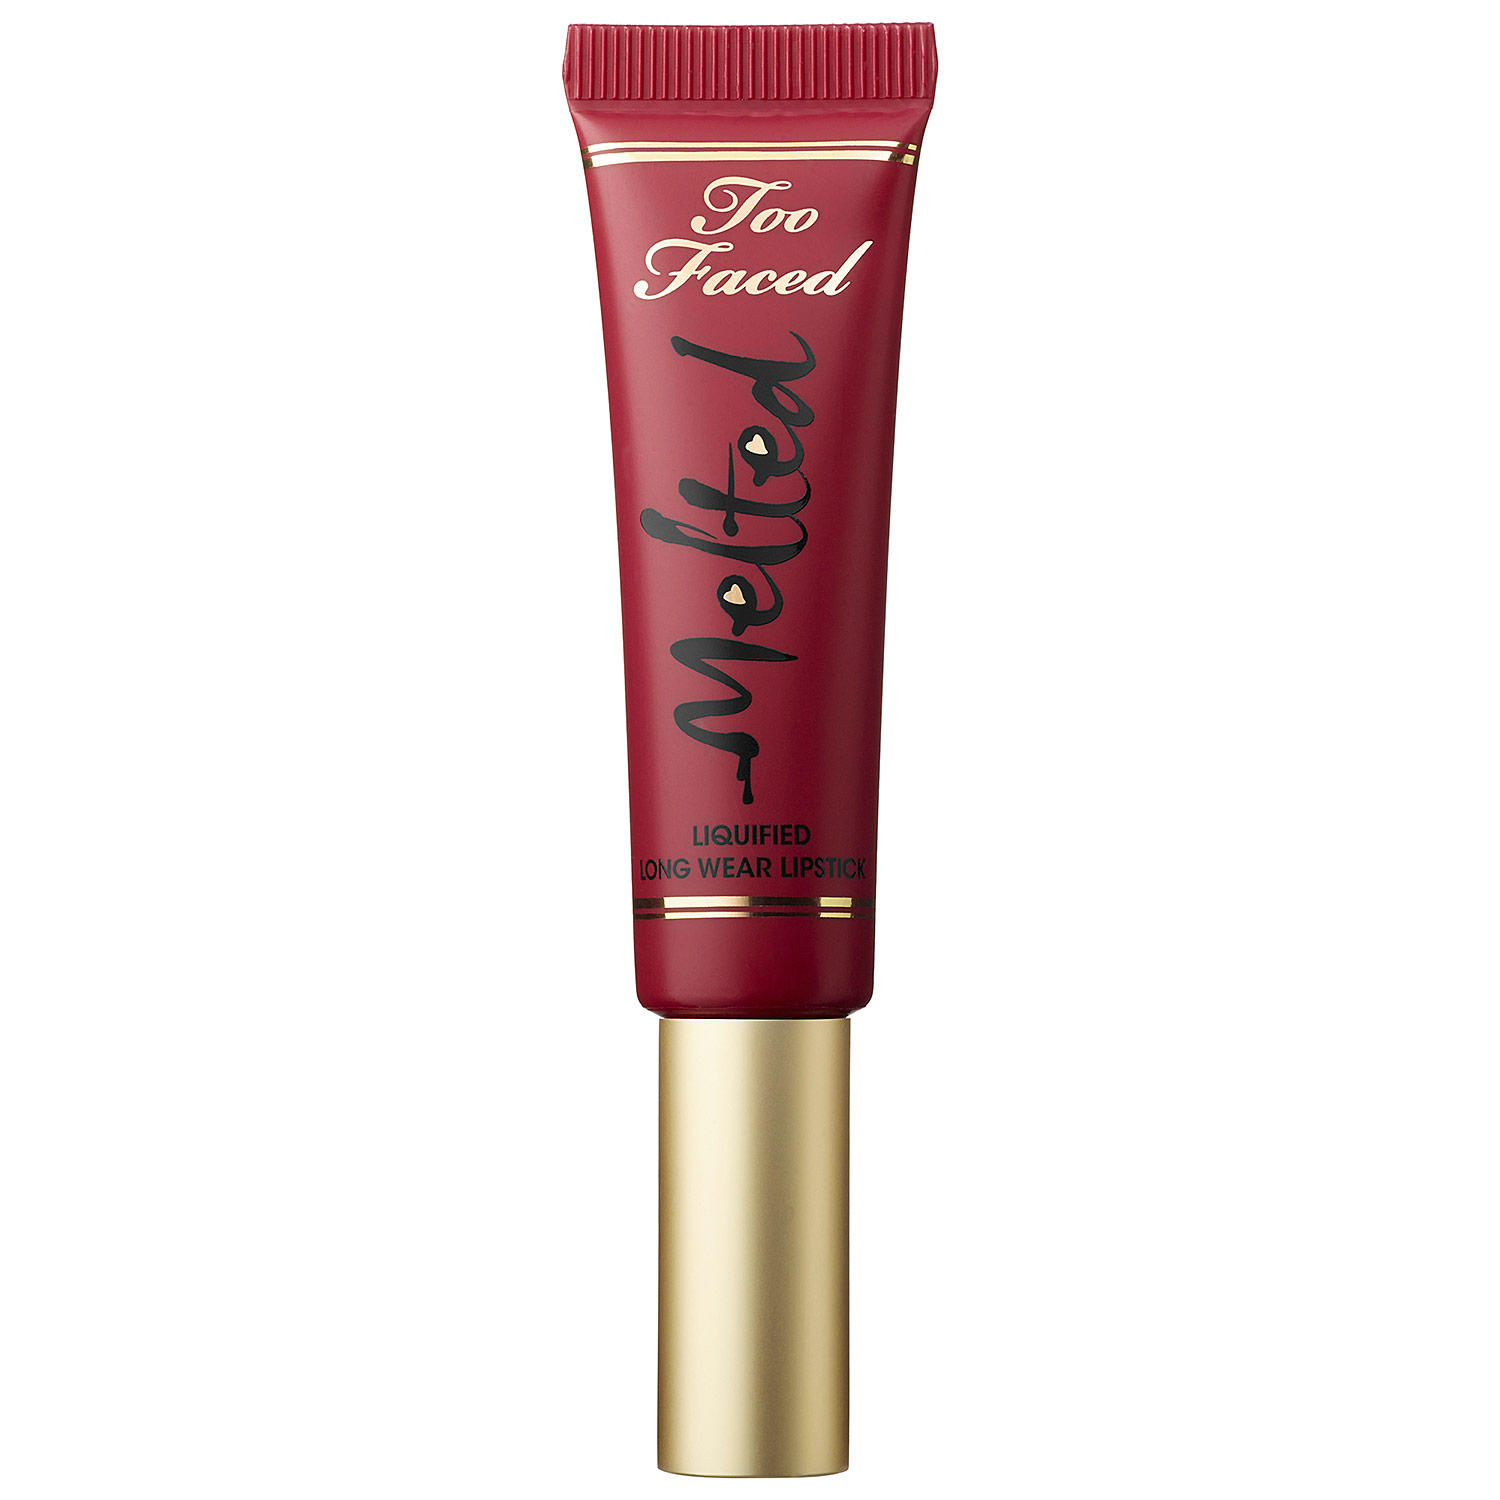 Too Faced Liquified Long Wear Lipstick Melted Berry